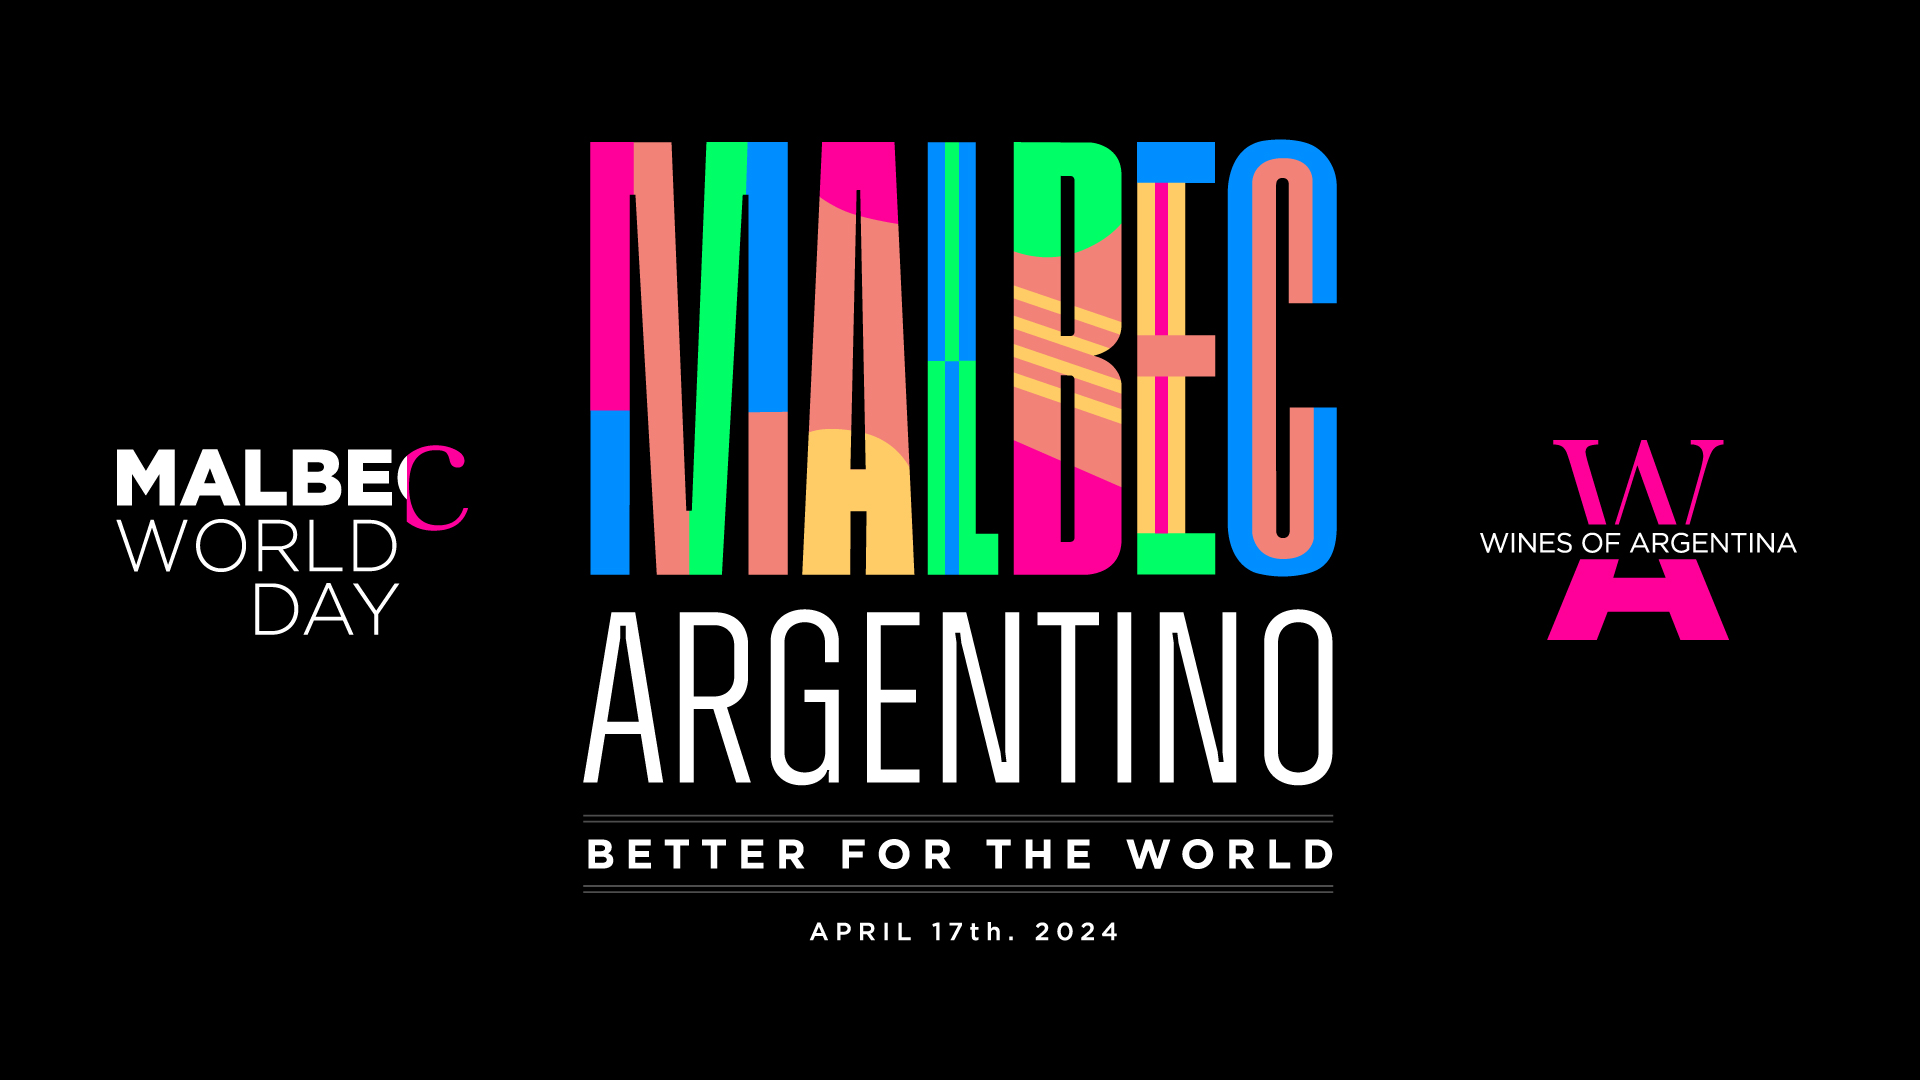 MALBEC WORLD DAY 2024 BETTER FOR THE WORLD